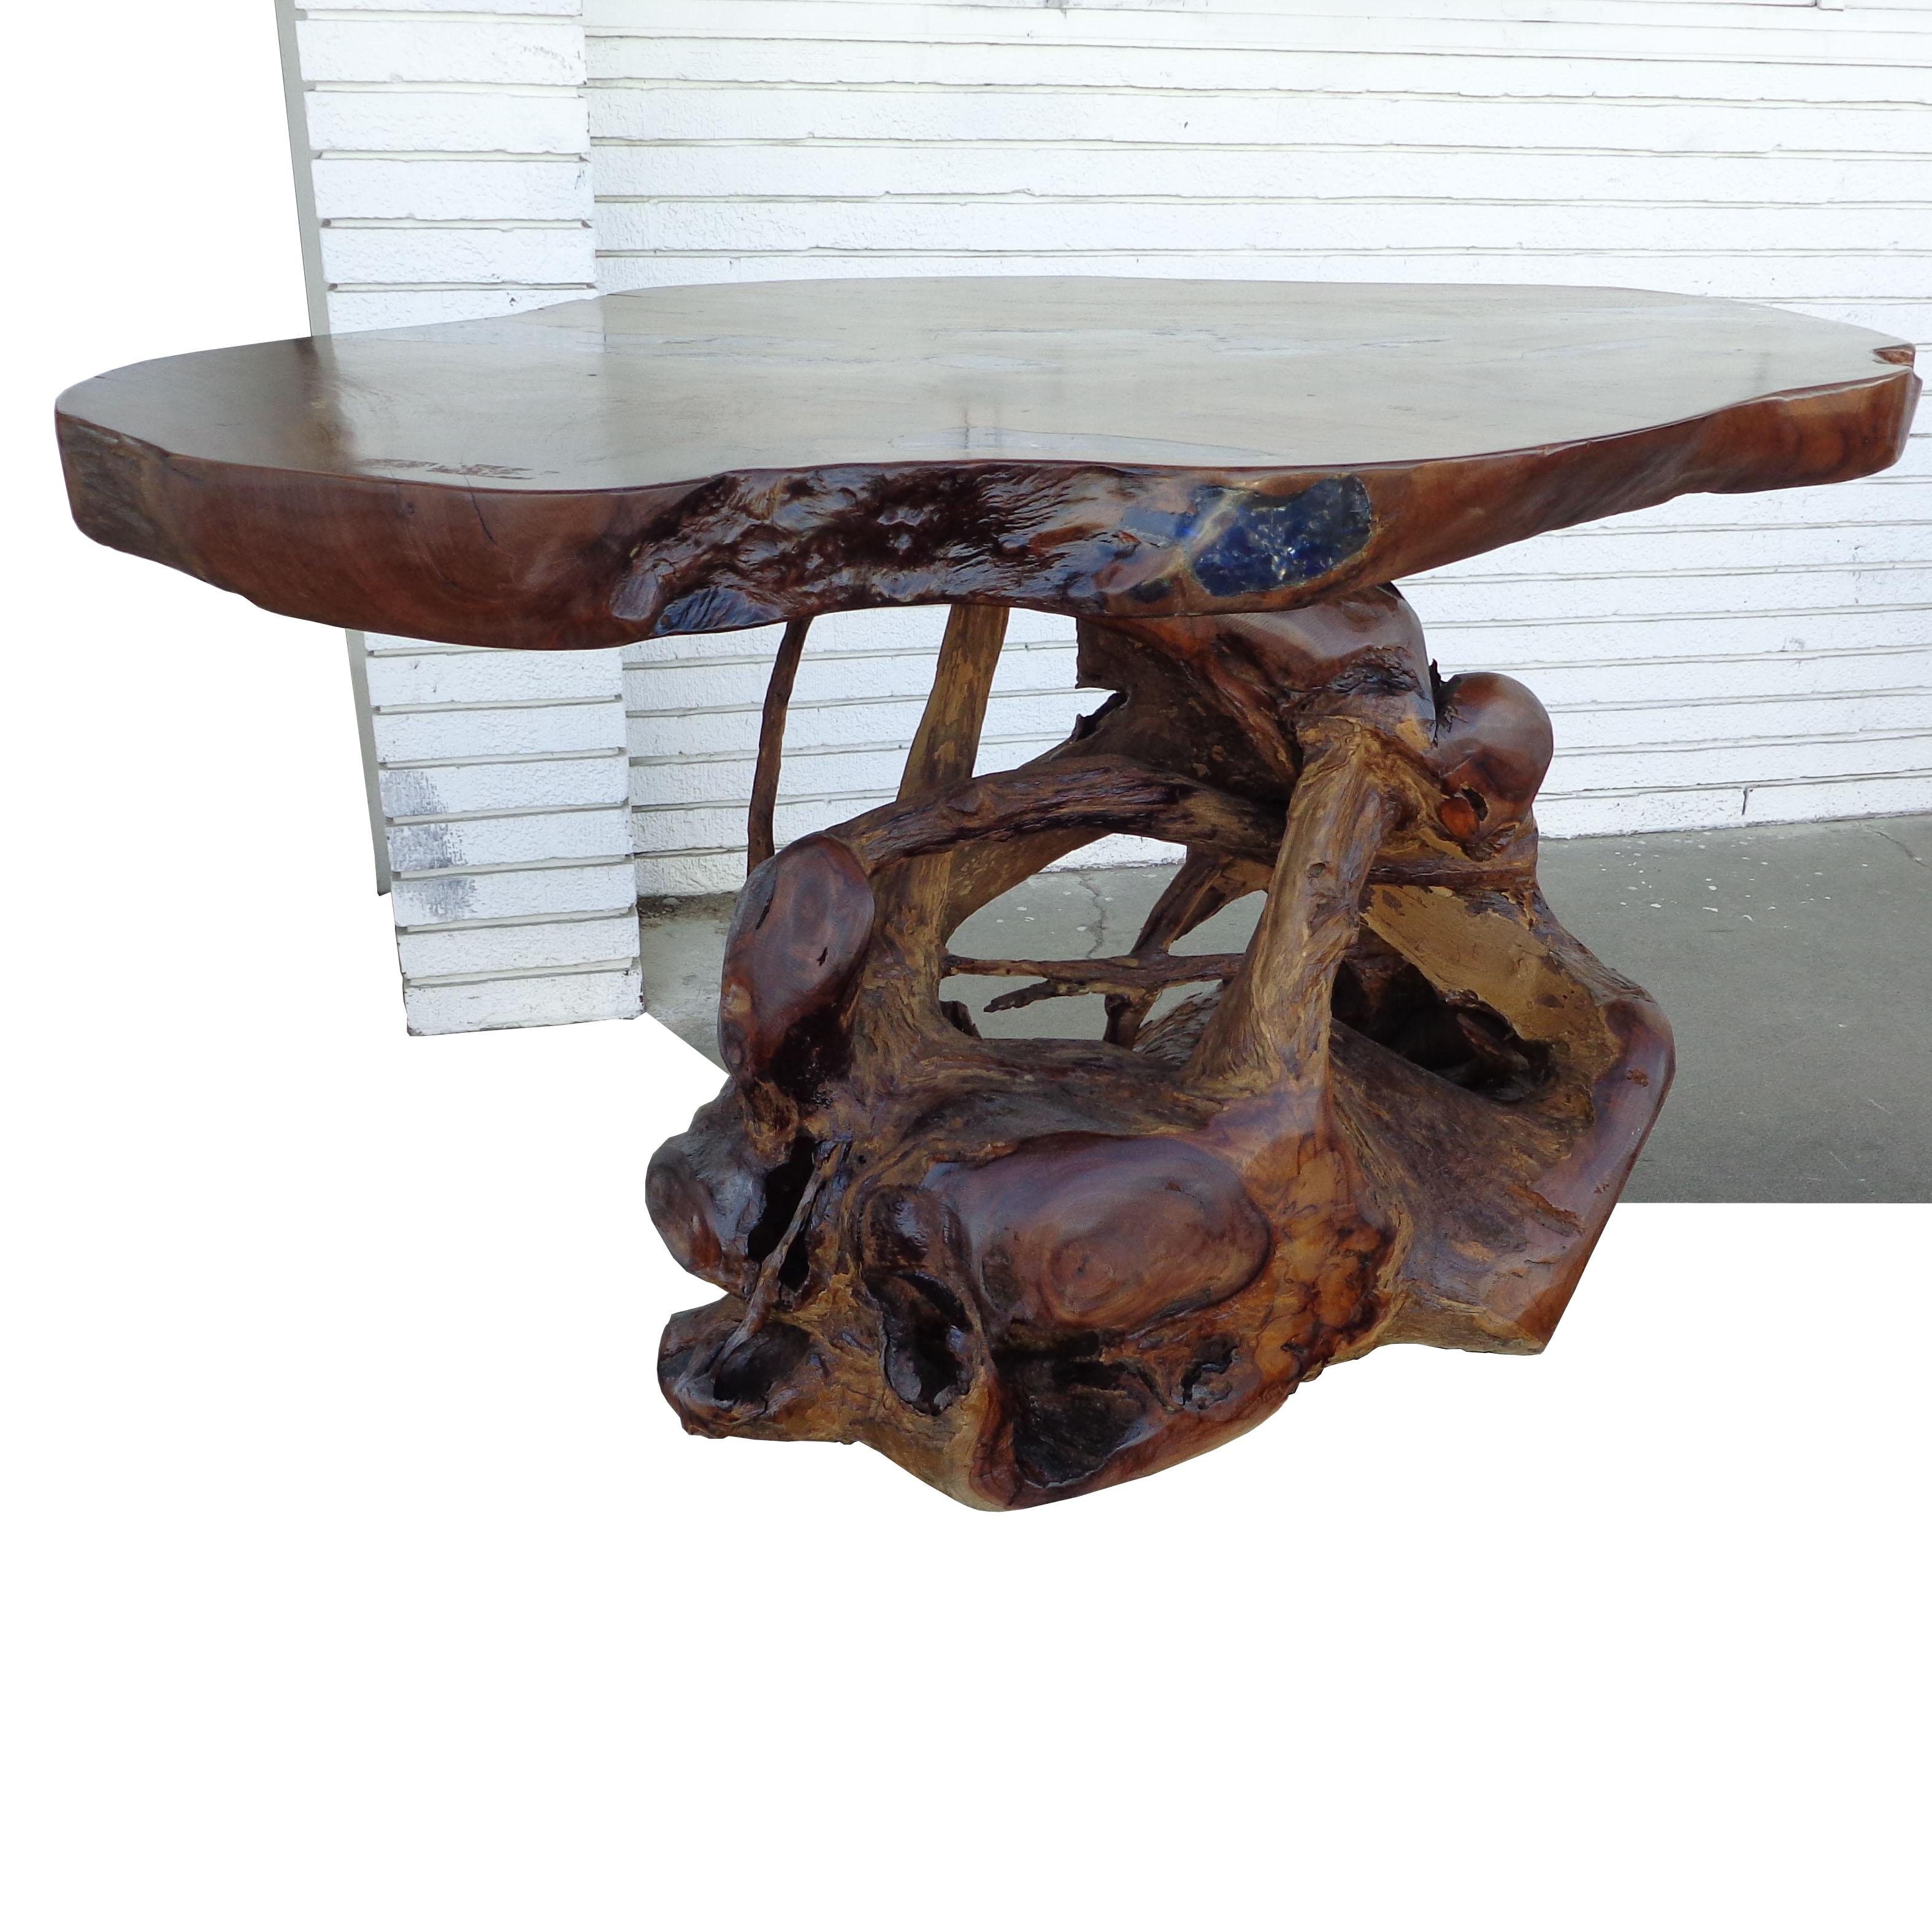 54” live edge glass inlaid dining console table
 
 
California burl root style live edge table with epoxy resin and volcanic rock inlays.

Measures: 54